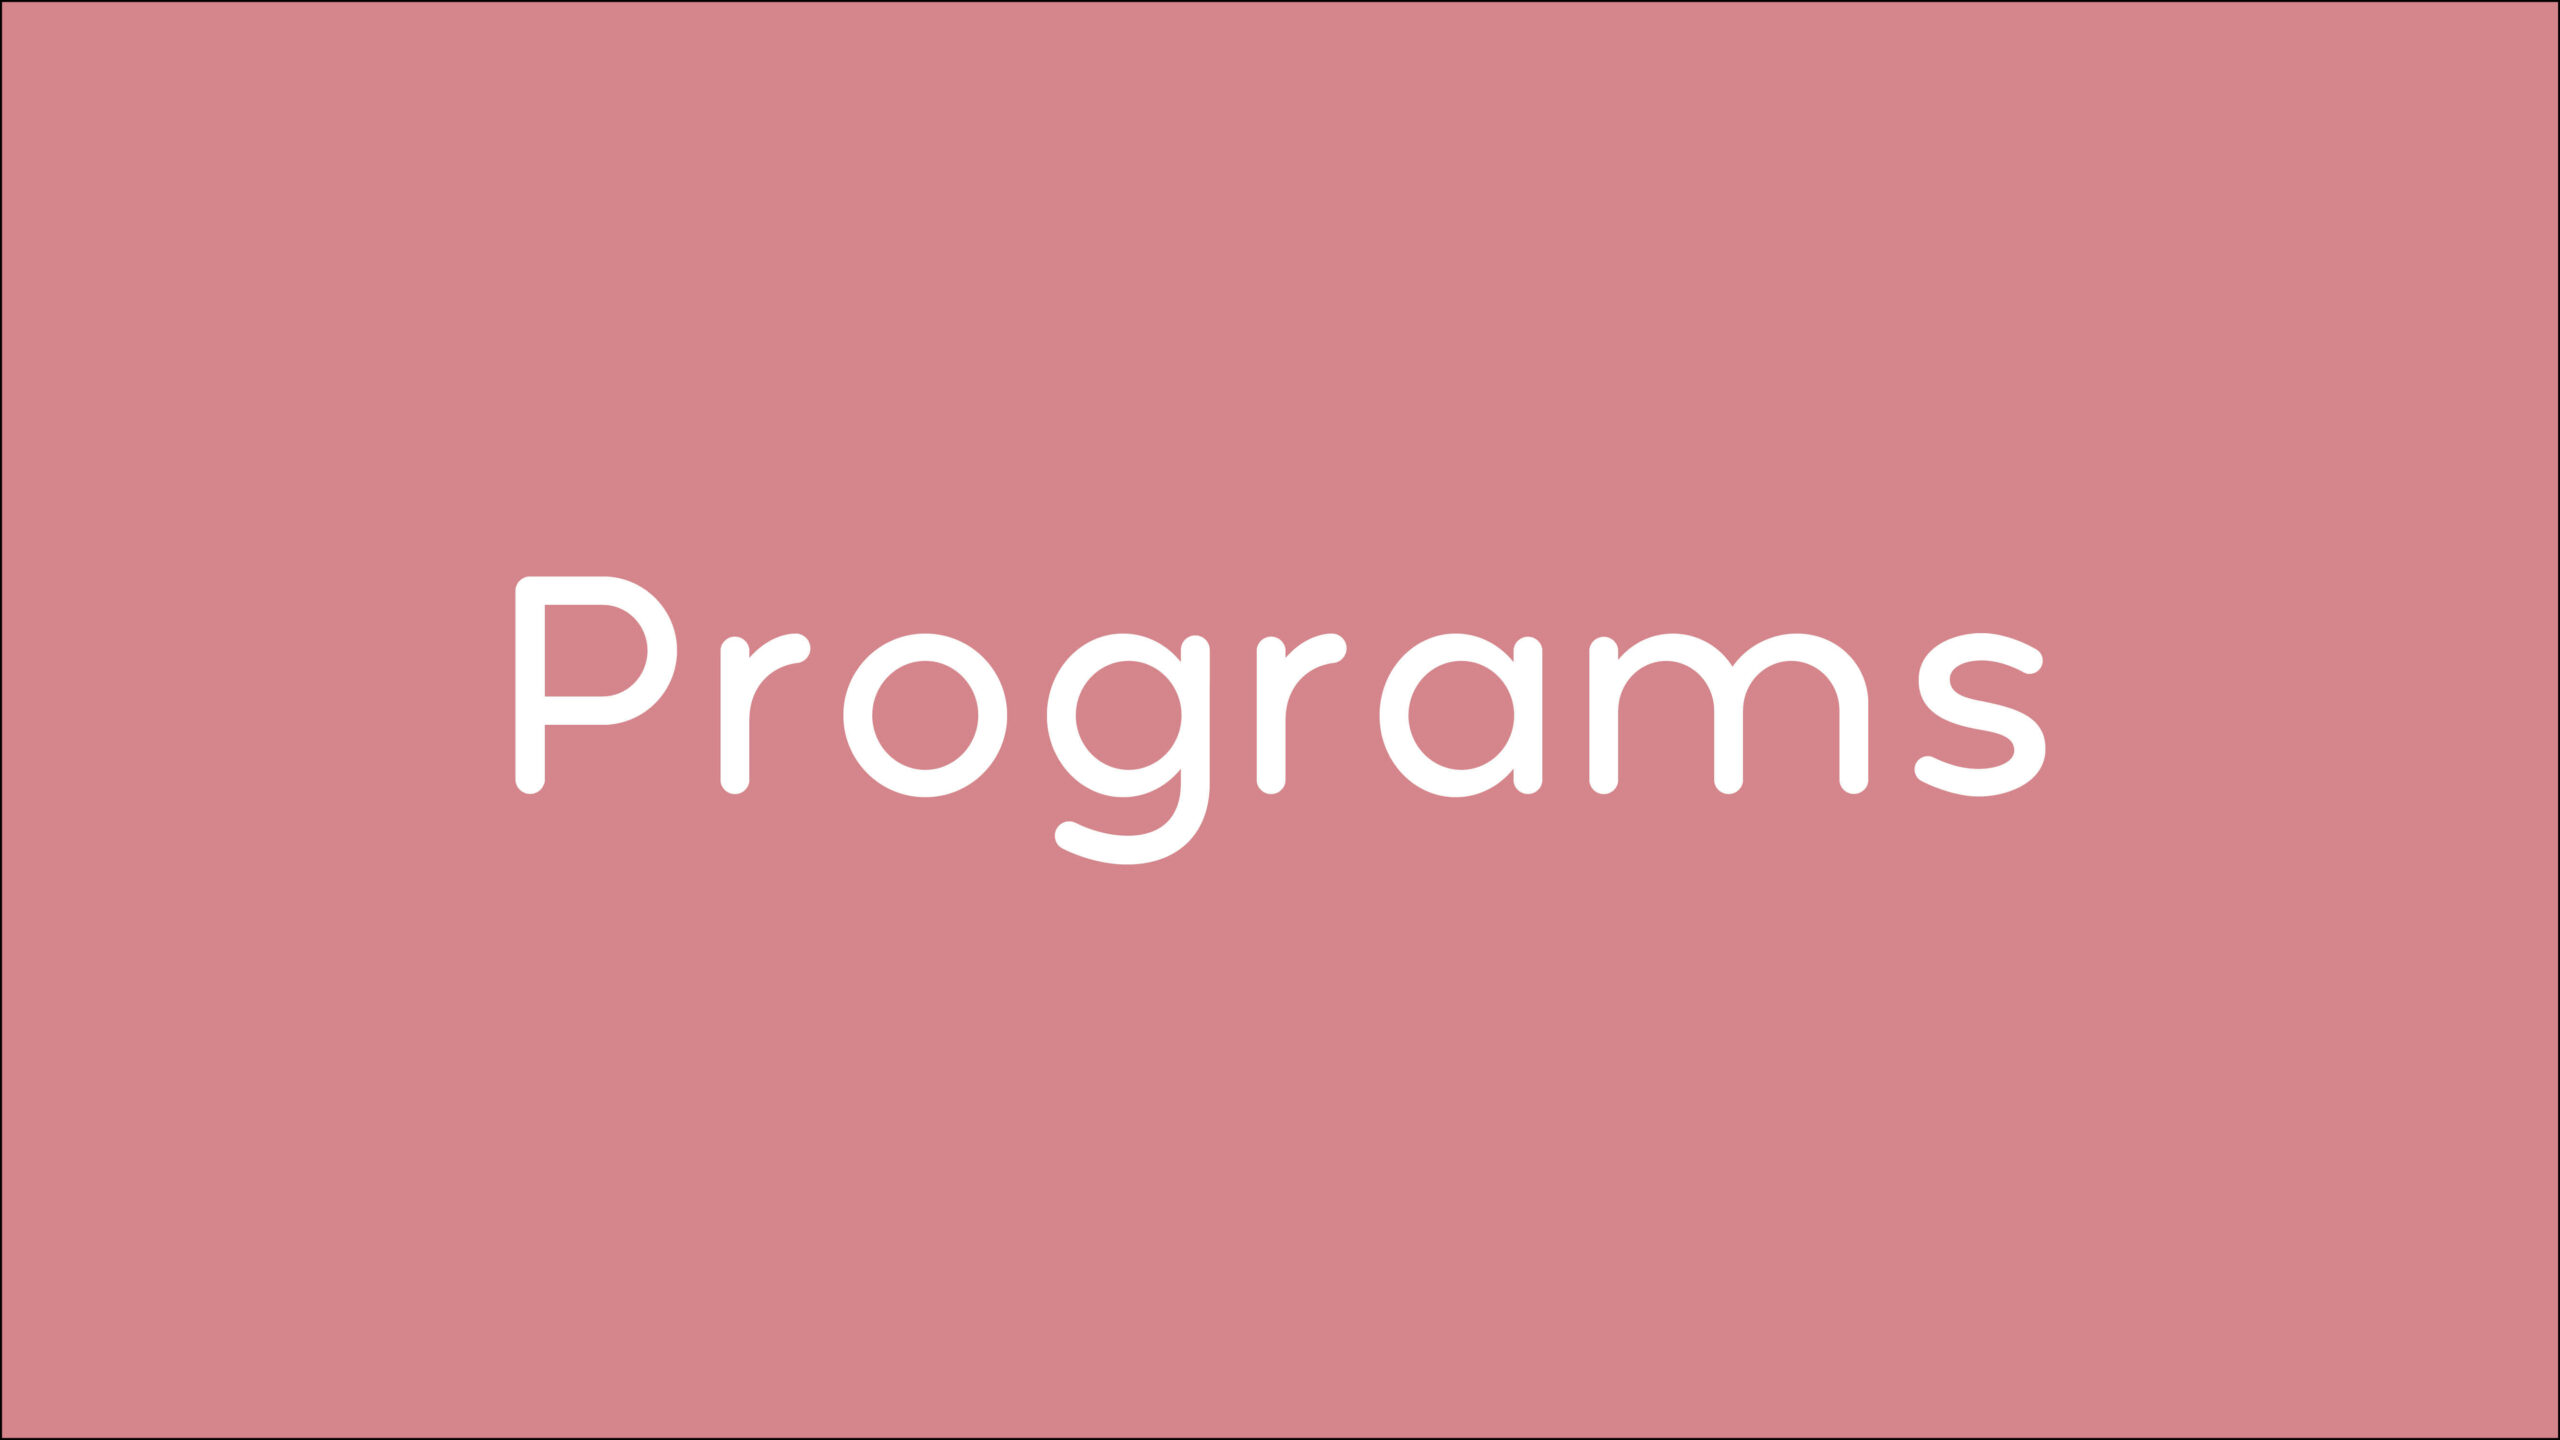 Programs Welcome Kit Graphic